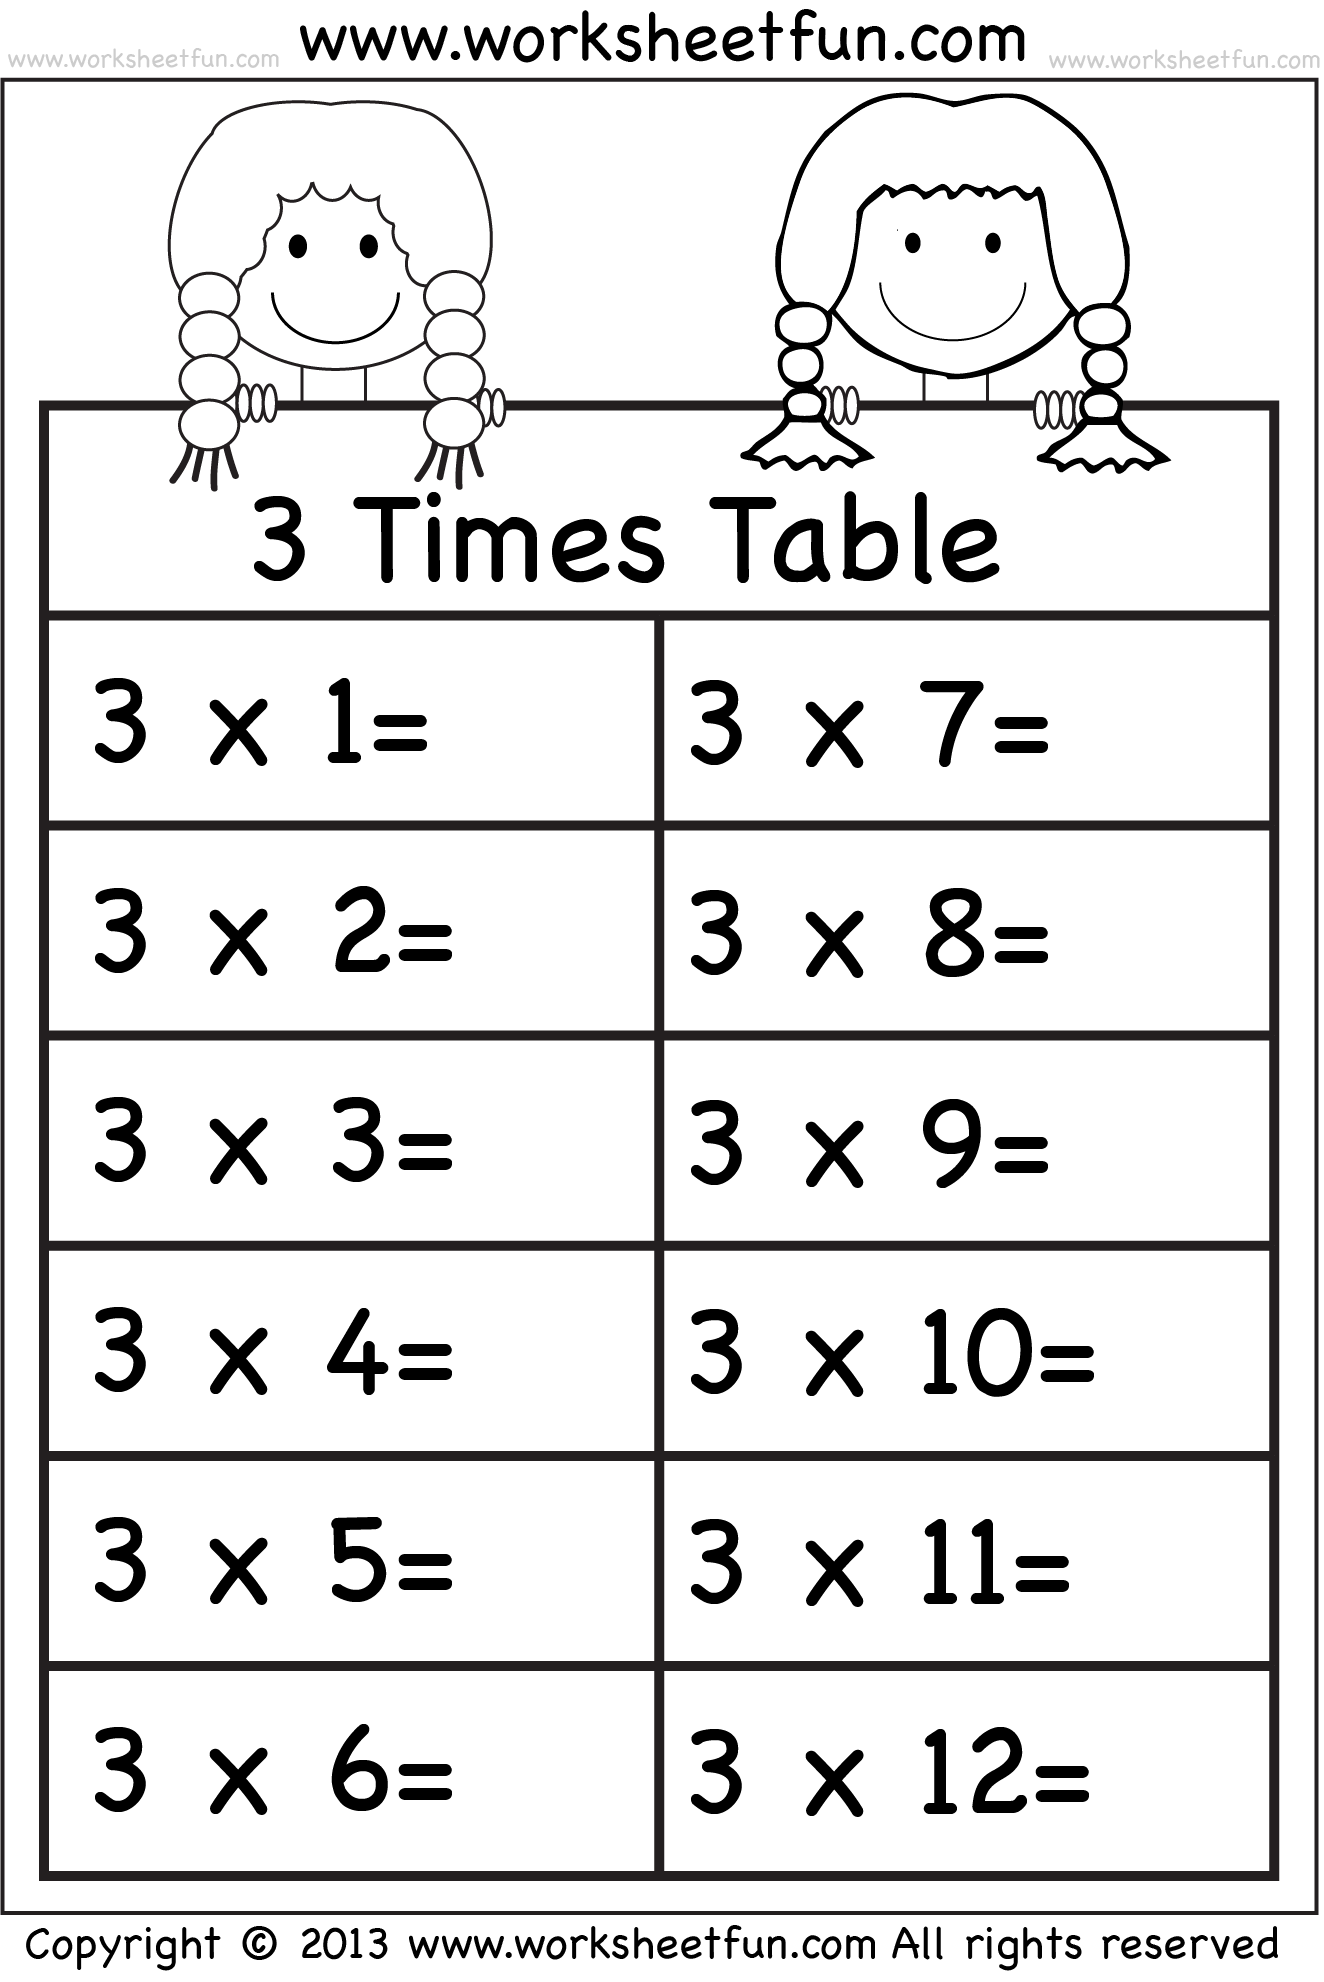 Times Tables Worksheets – 11, 11, 11, 11, 11, 11, 11, 11, 11, 11 and 111 Throughout 3 Times Table Worksheet